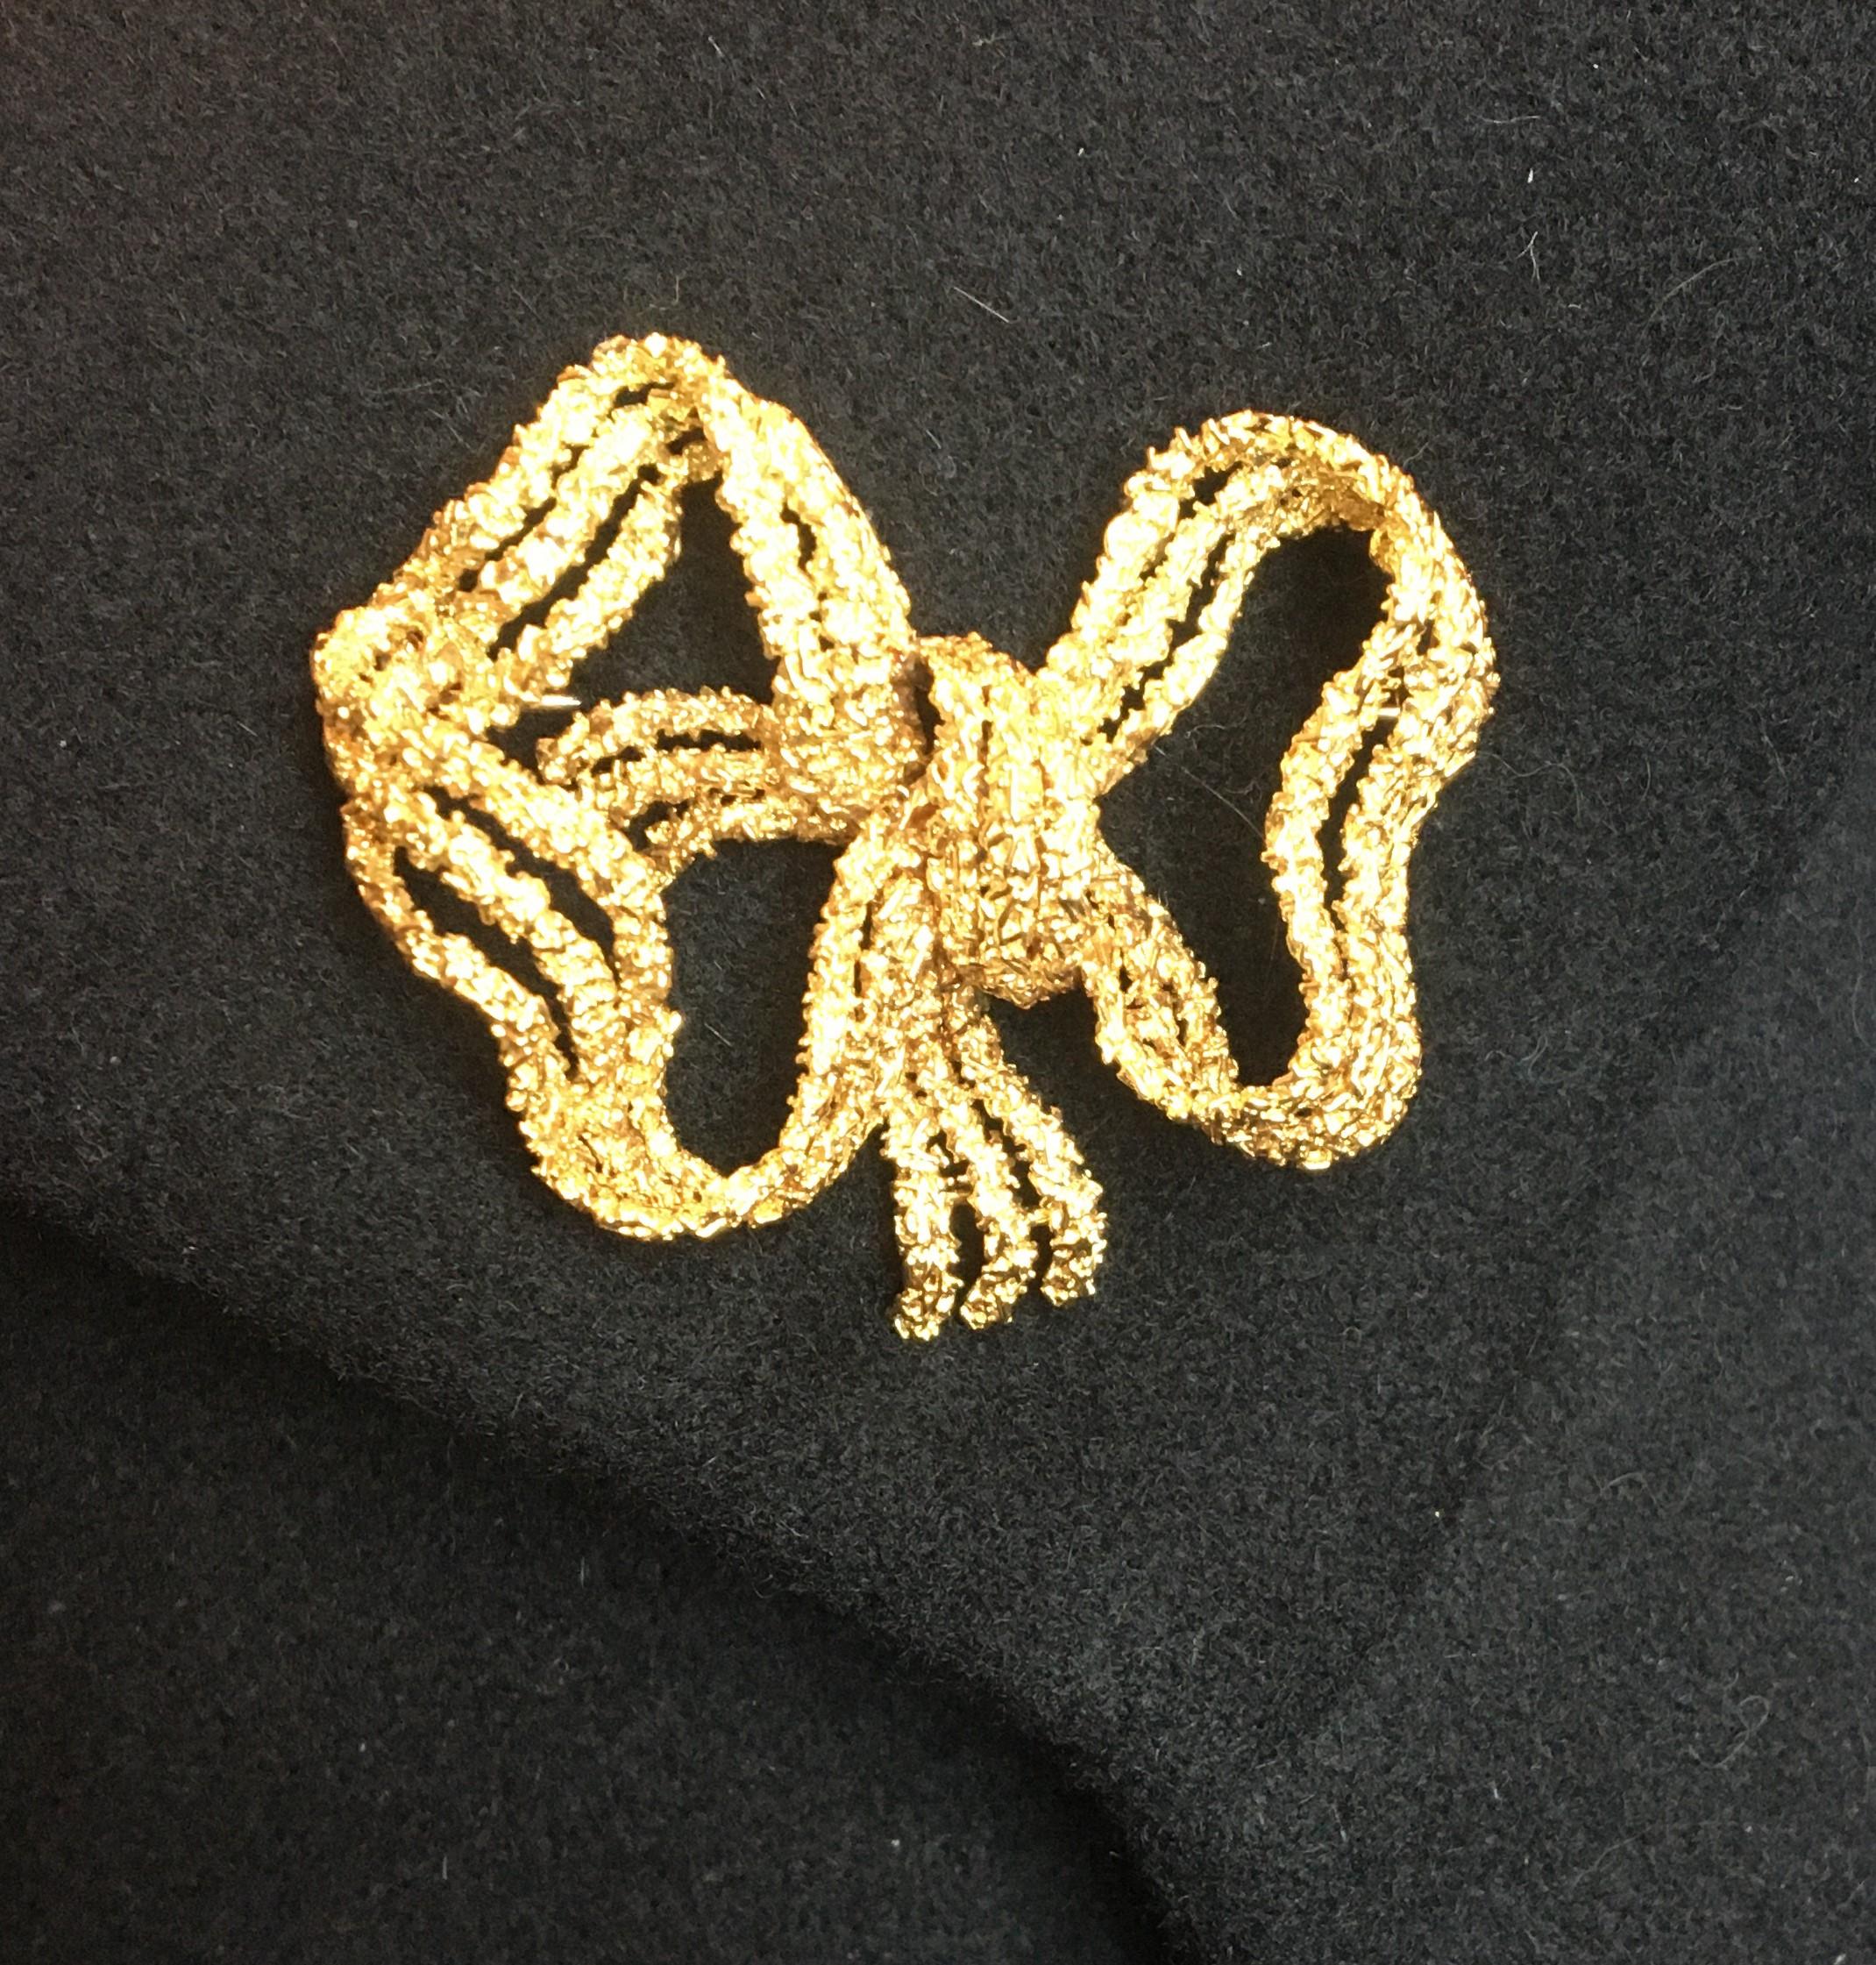 This beautiful brooch will look great on any piece of clothing.
14 karat yellow gold 
Three strands with textured finish 
Straight pin closure with C clasp